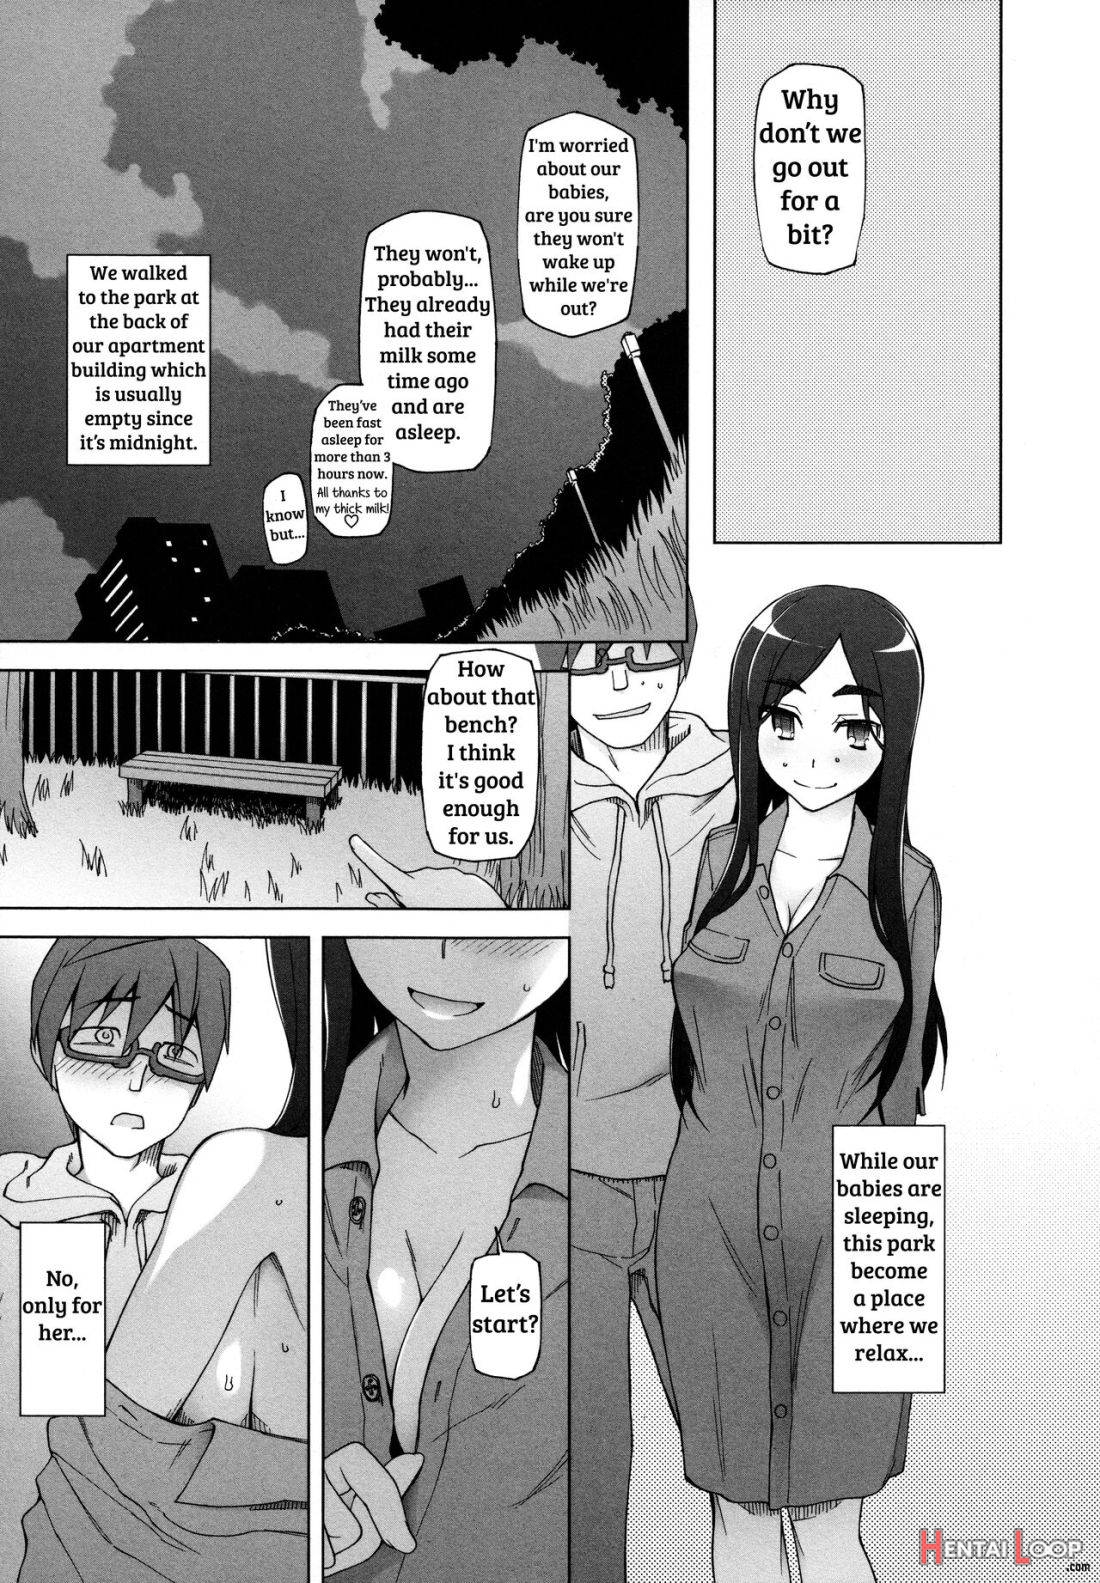 Jusei Ganbou page 13